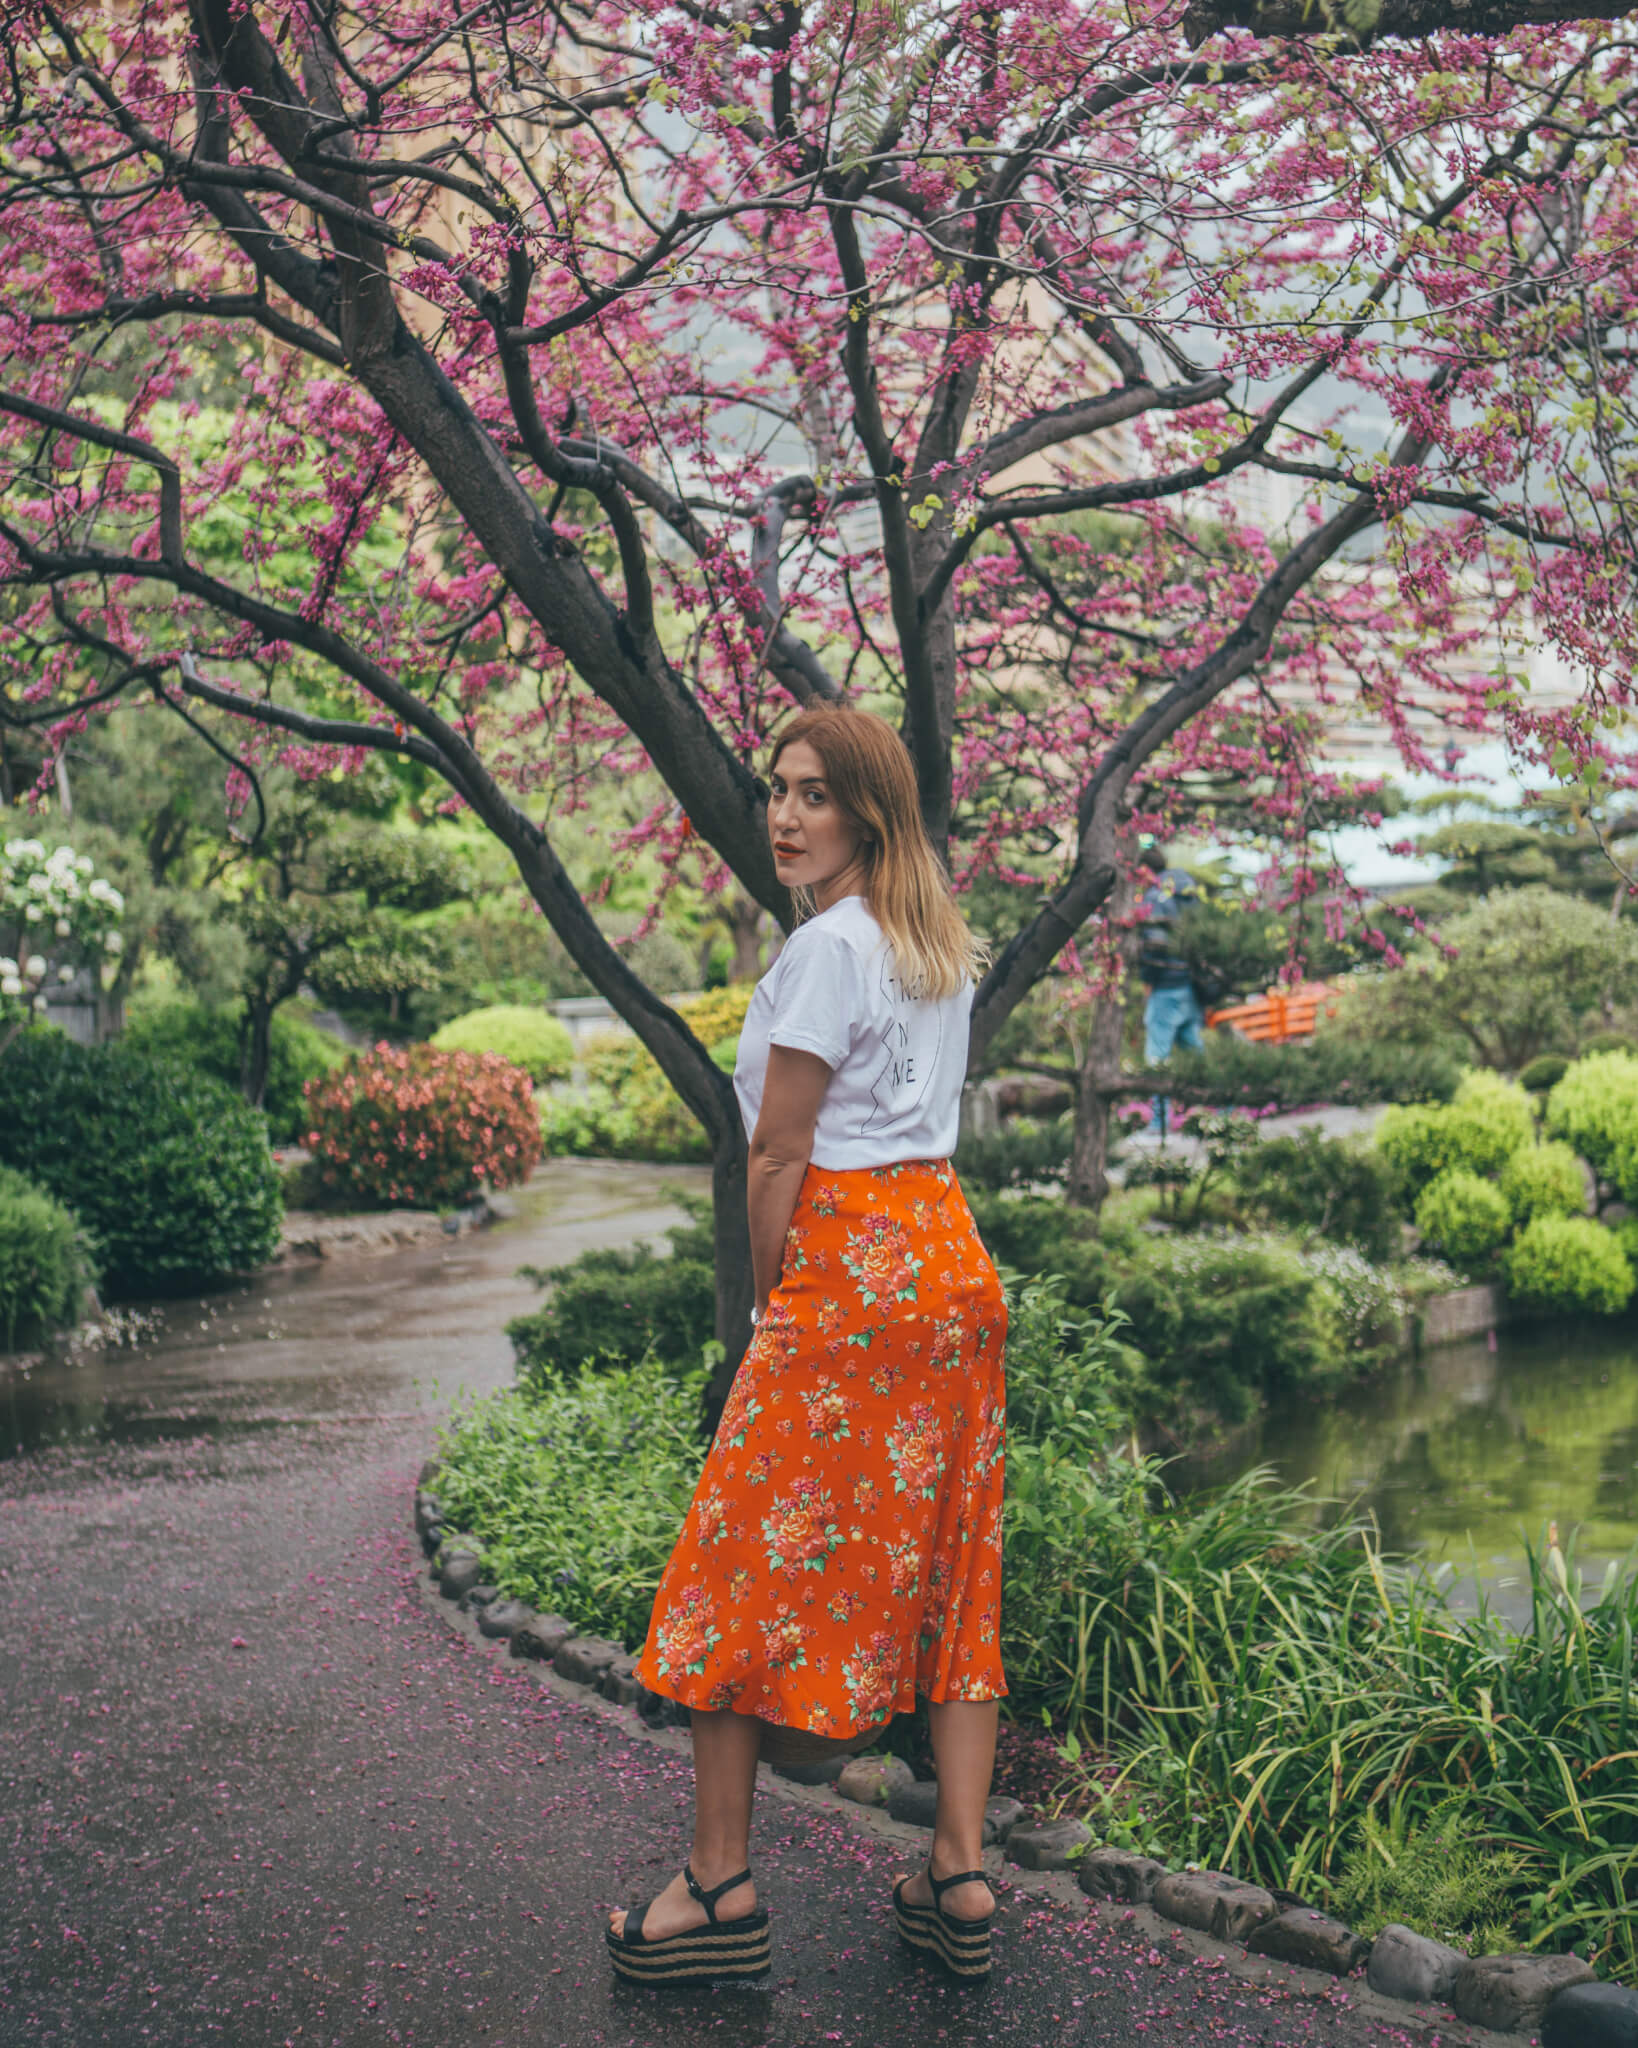 And-Other-Stories-Japanese-Garden-4-of-12-1 Japanese Garden Monaco - What I Wore